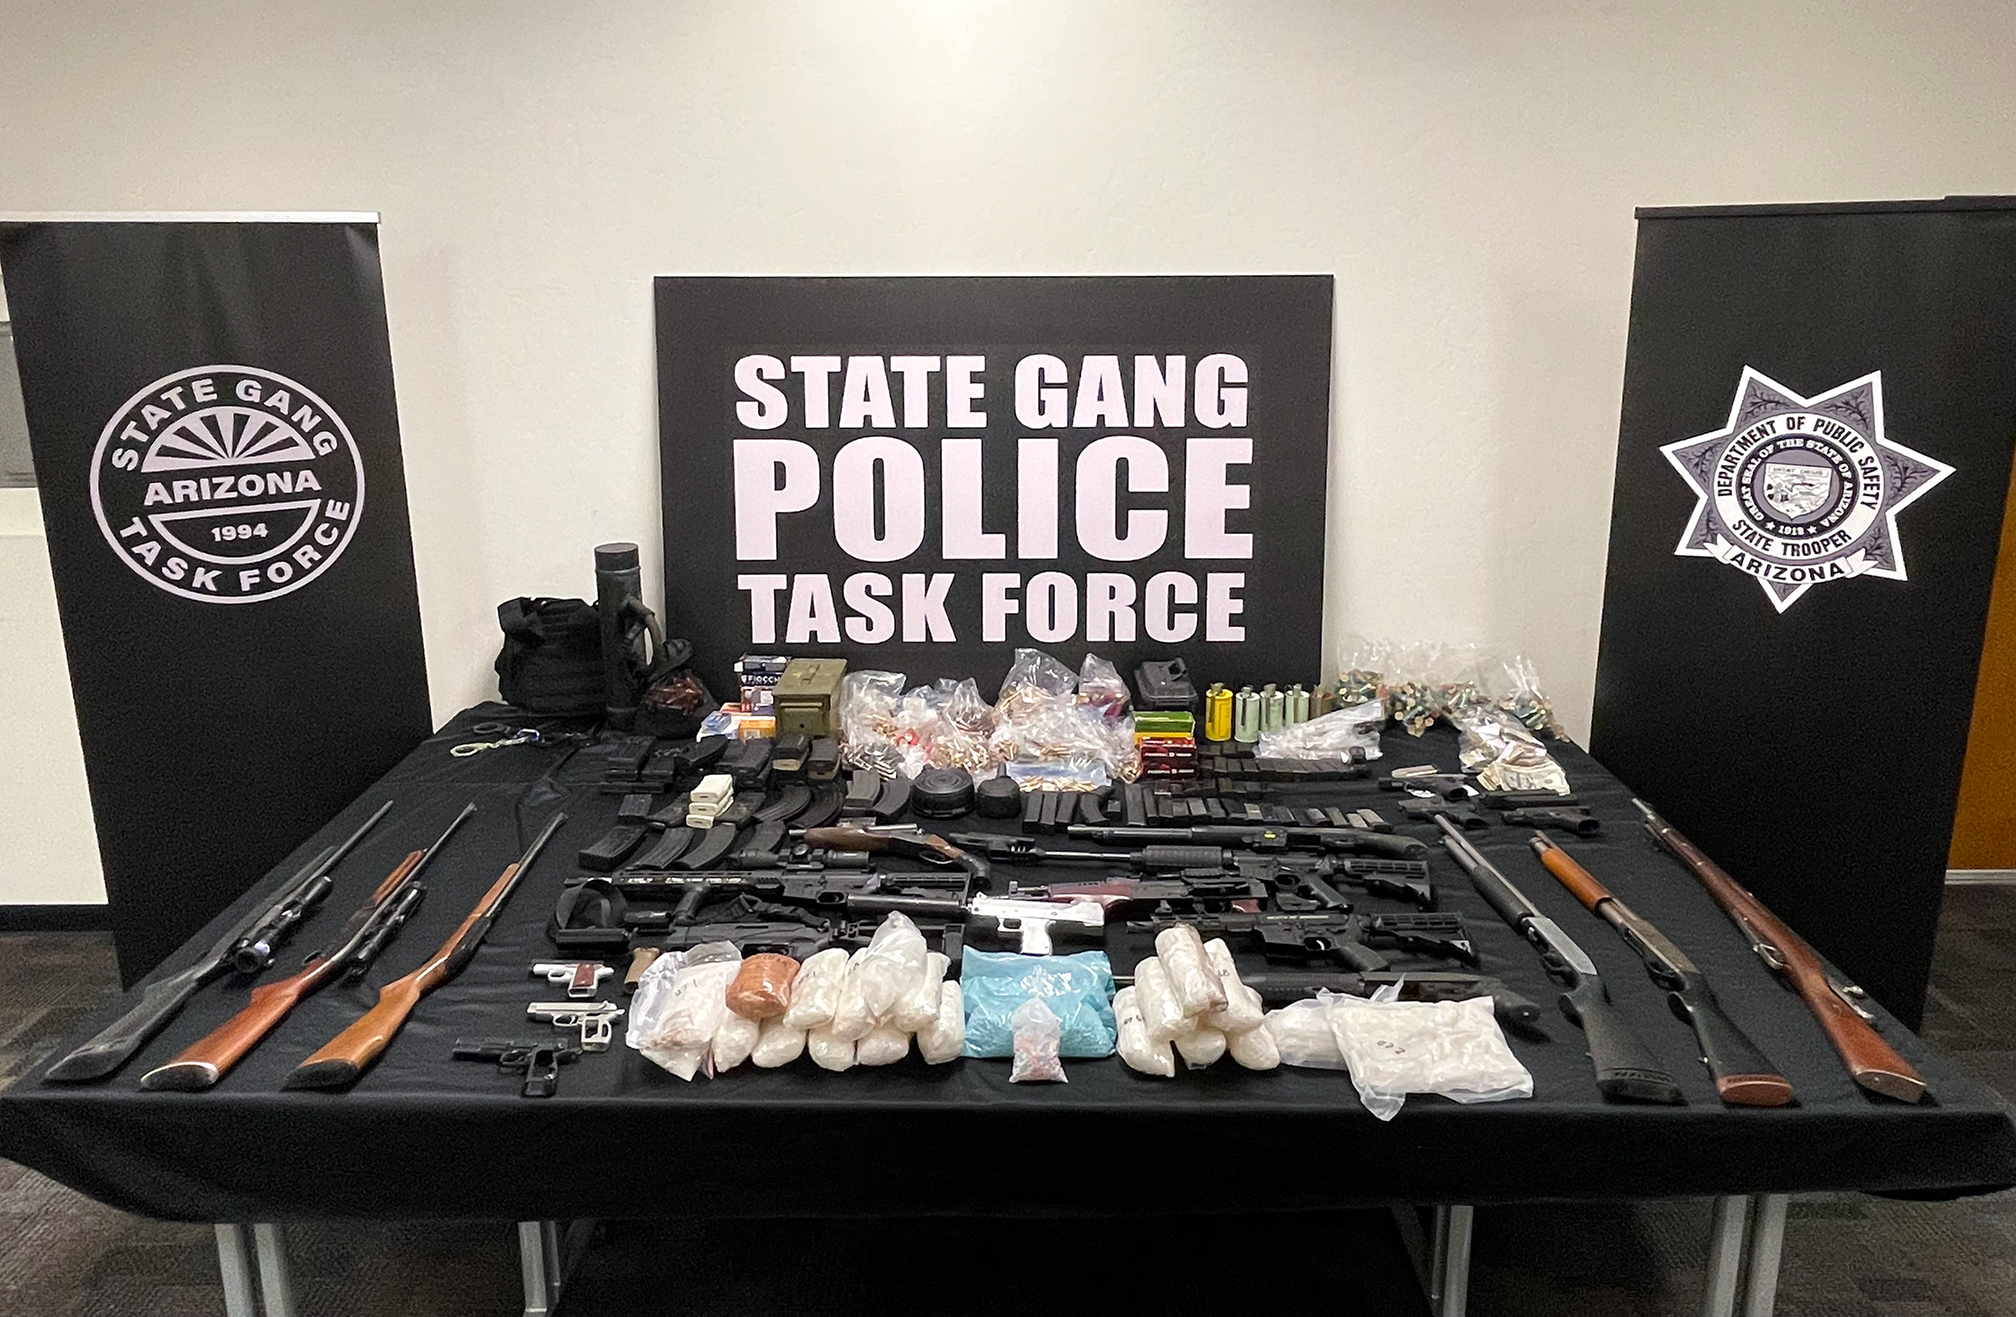 Drugs and weapons seized are displayed on a table